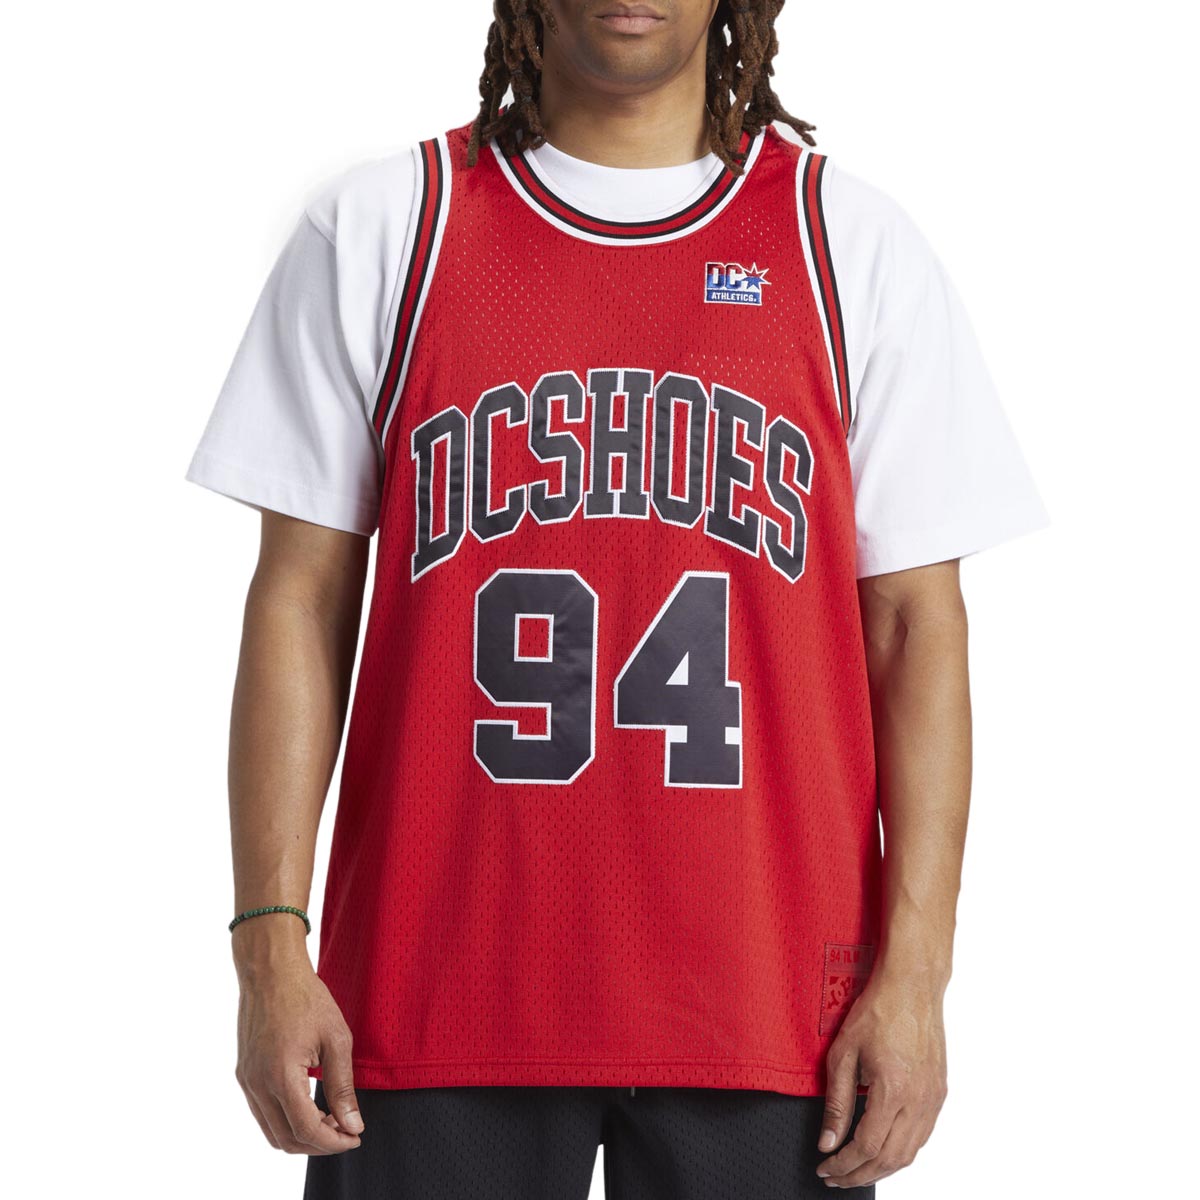 DC Chi Town Jersey - Racing Red image 1